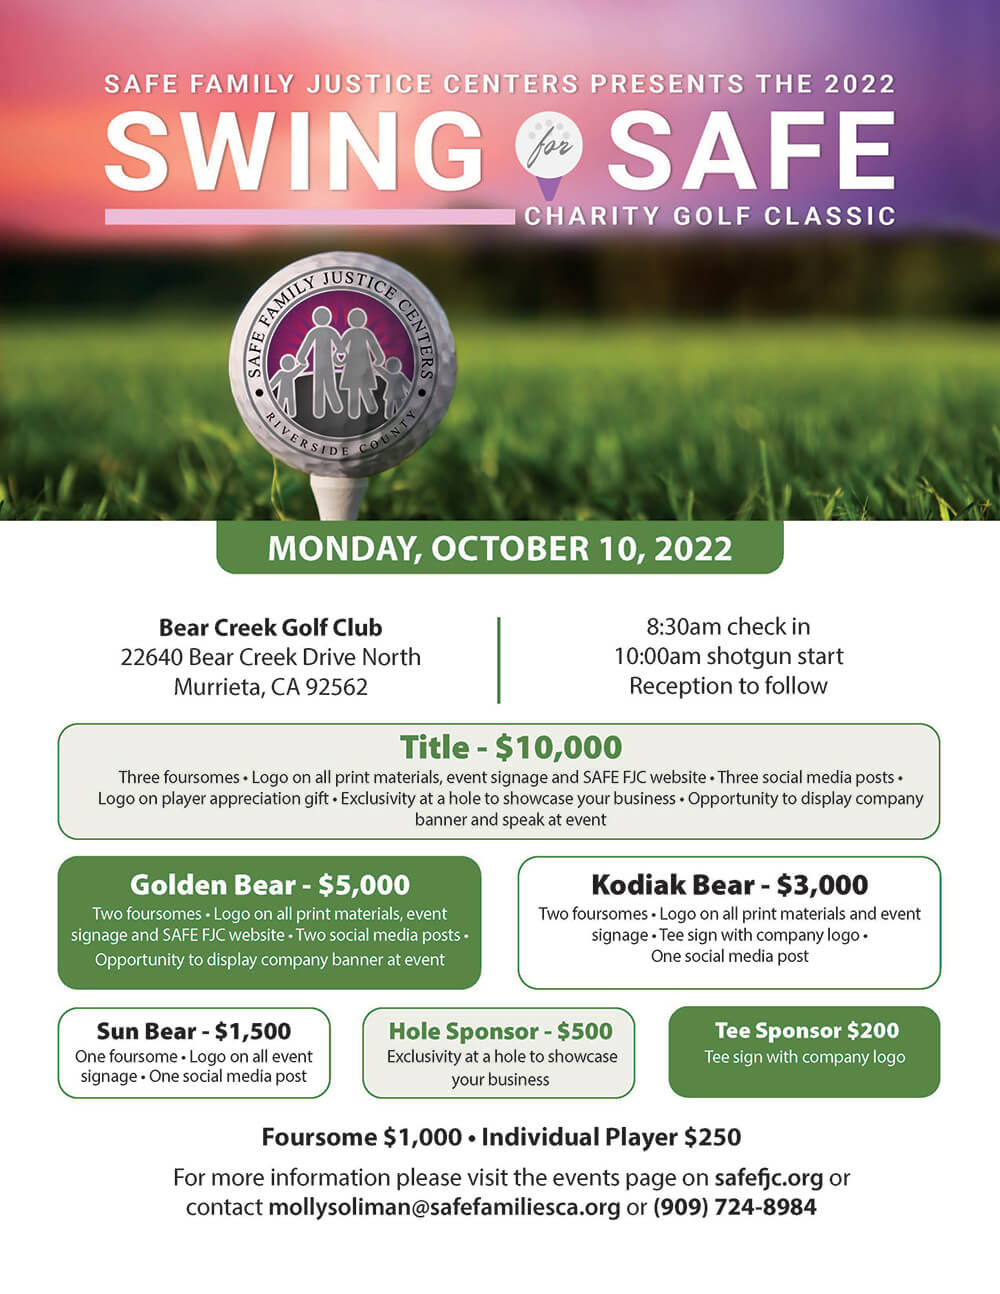 SAFE Family Justice Centers Golf Tournament